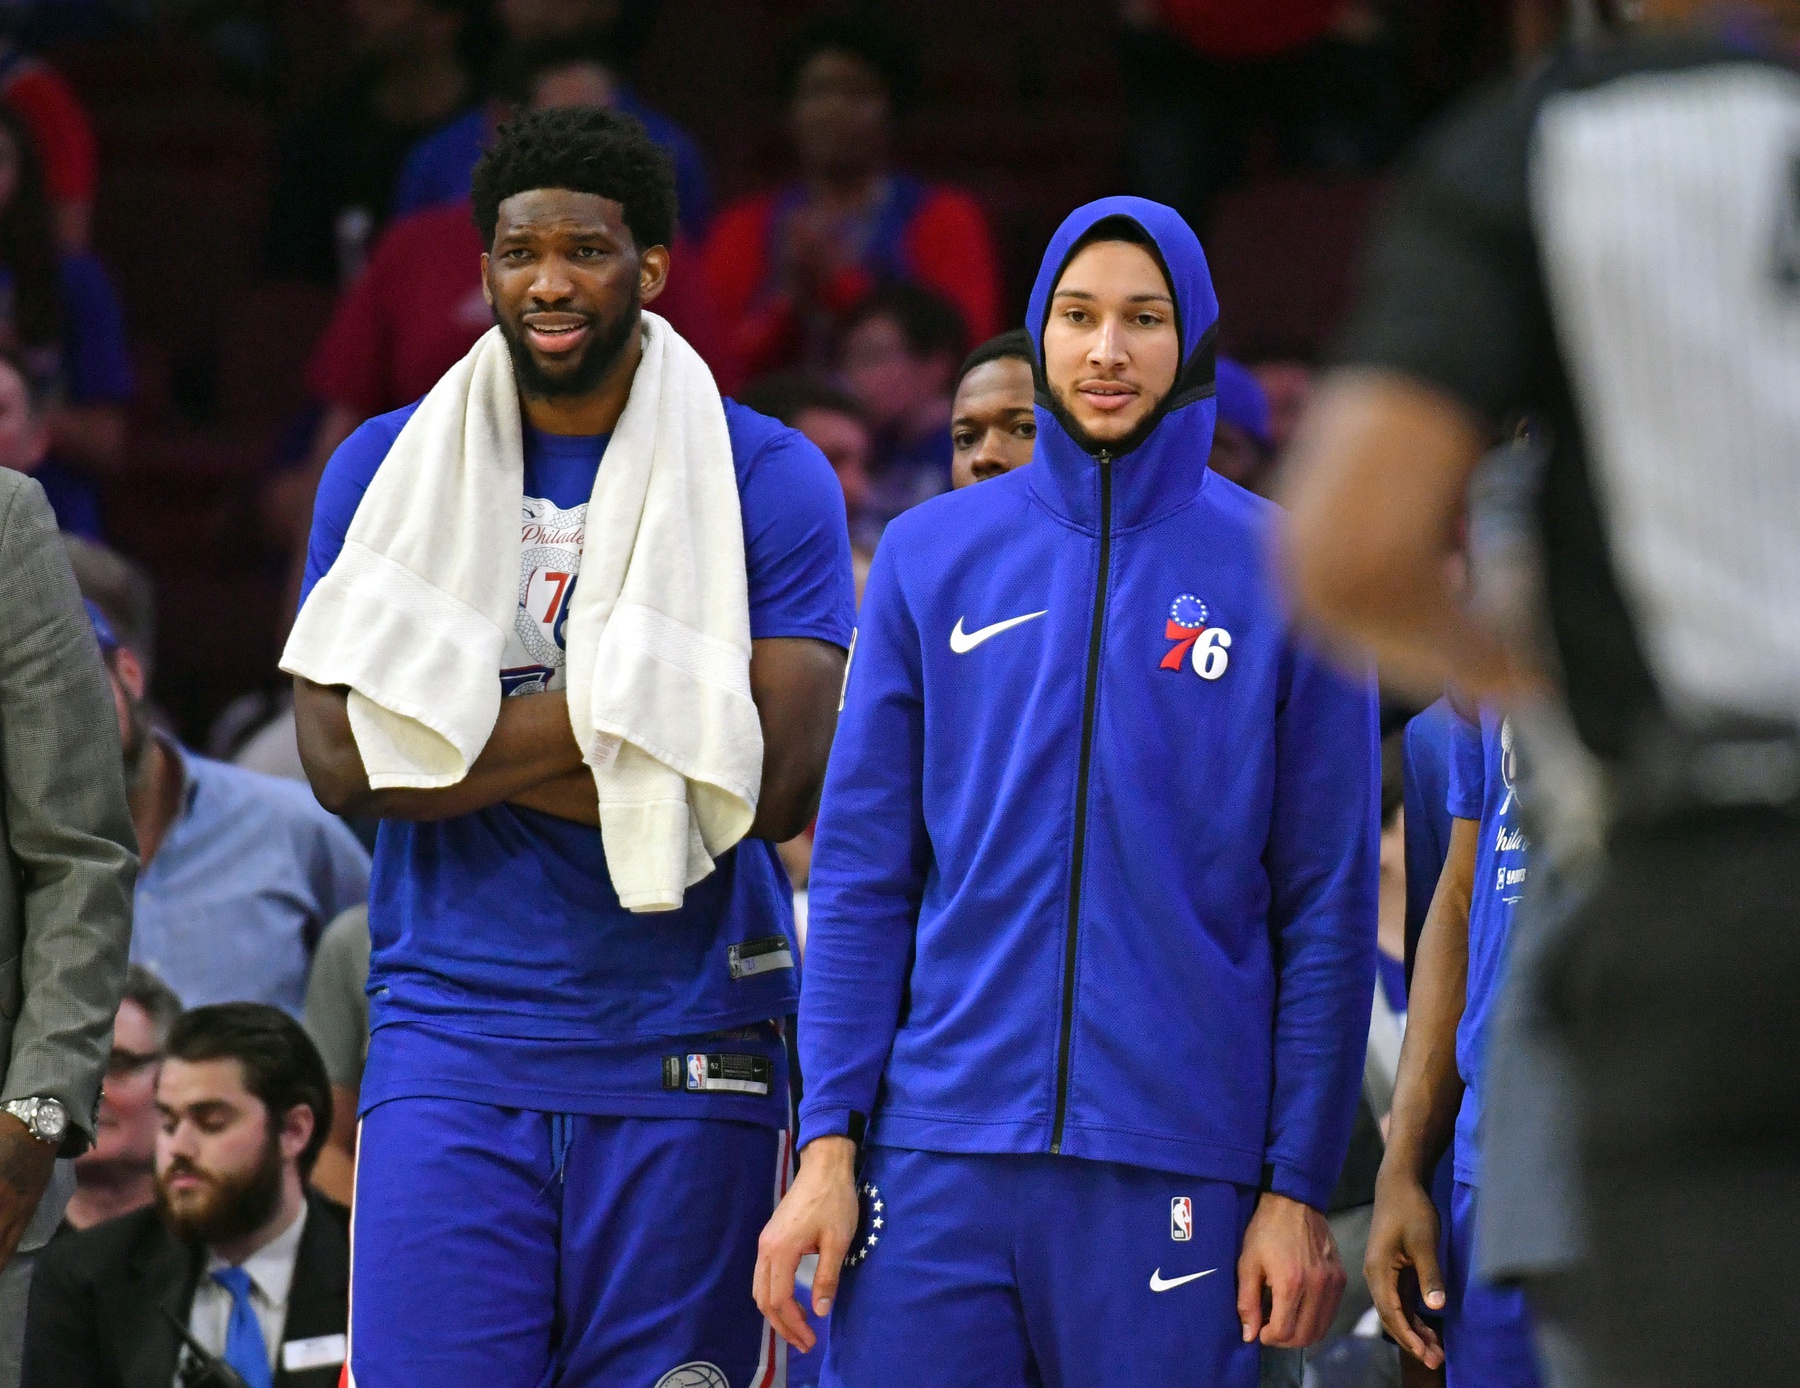 Zach Lowe Names Sixers “Top NBA League Pass Team” for Second Consecutive Year